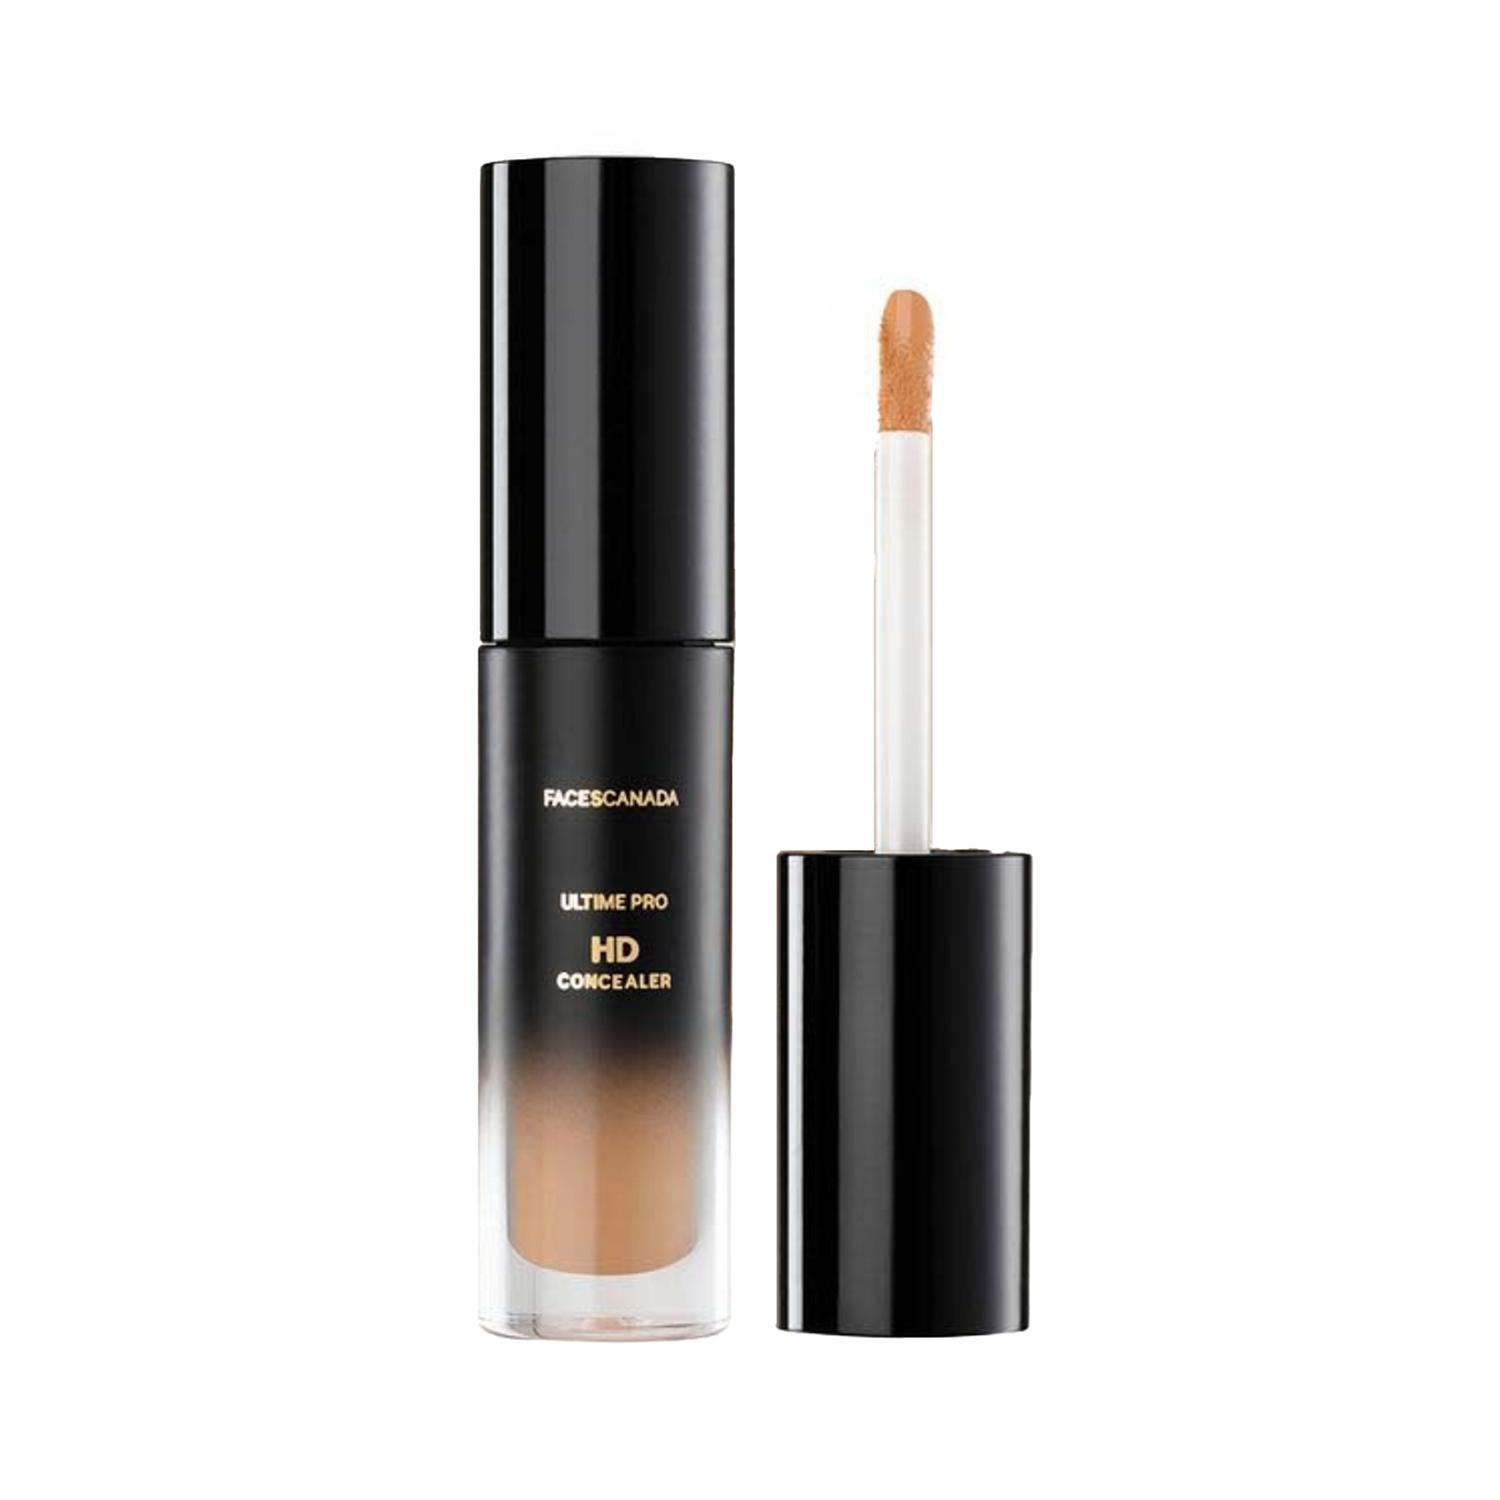 faces canada ultime pro hd concealer - 02 honey creme (3.8ml)